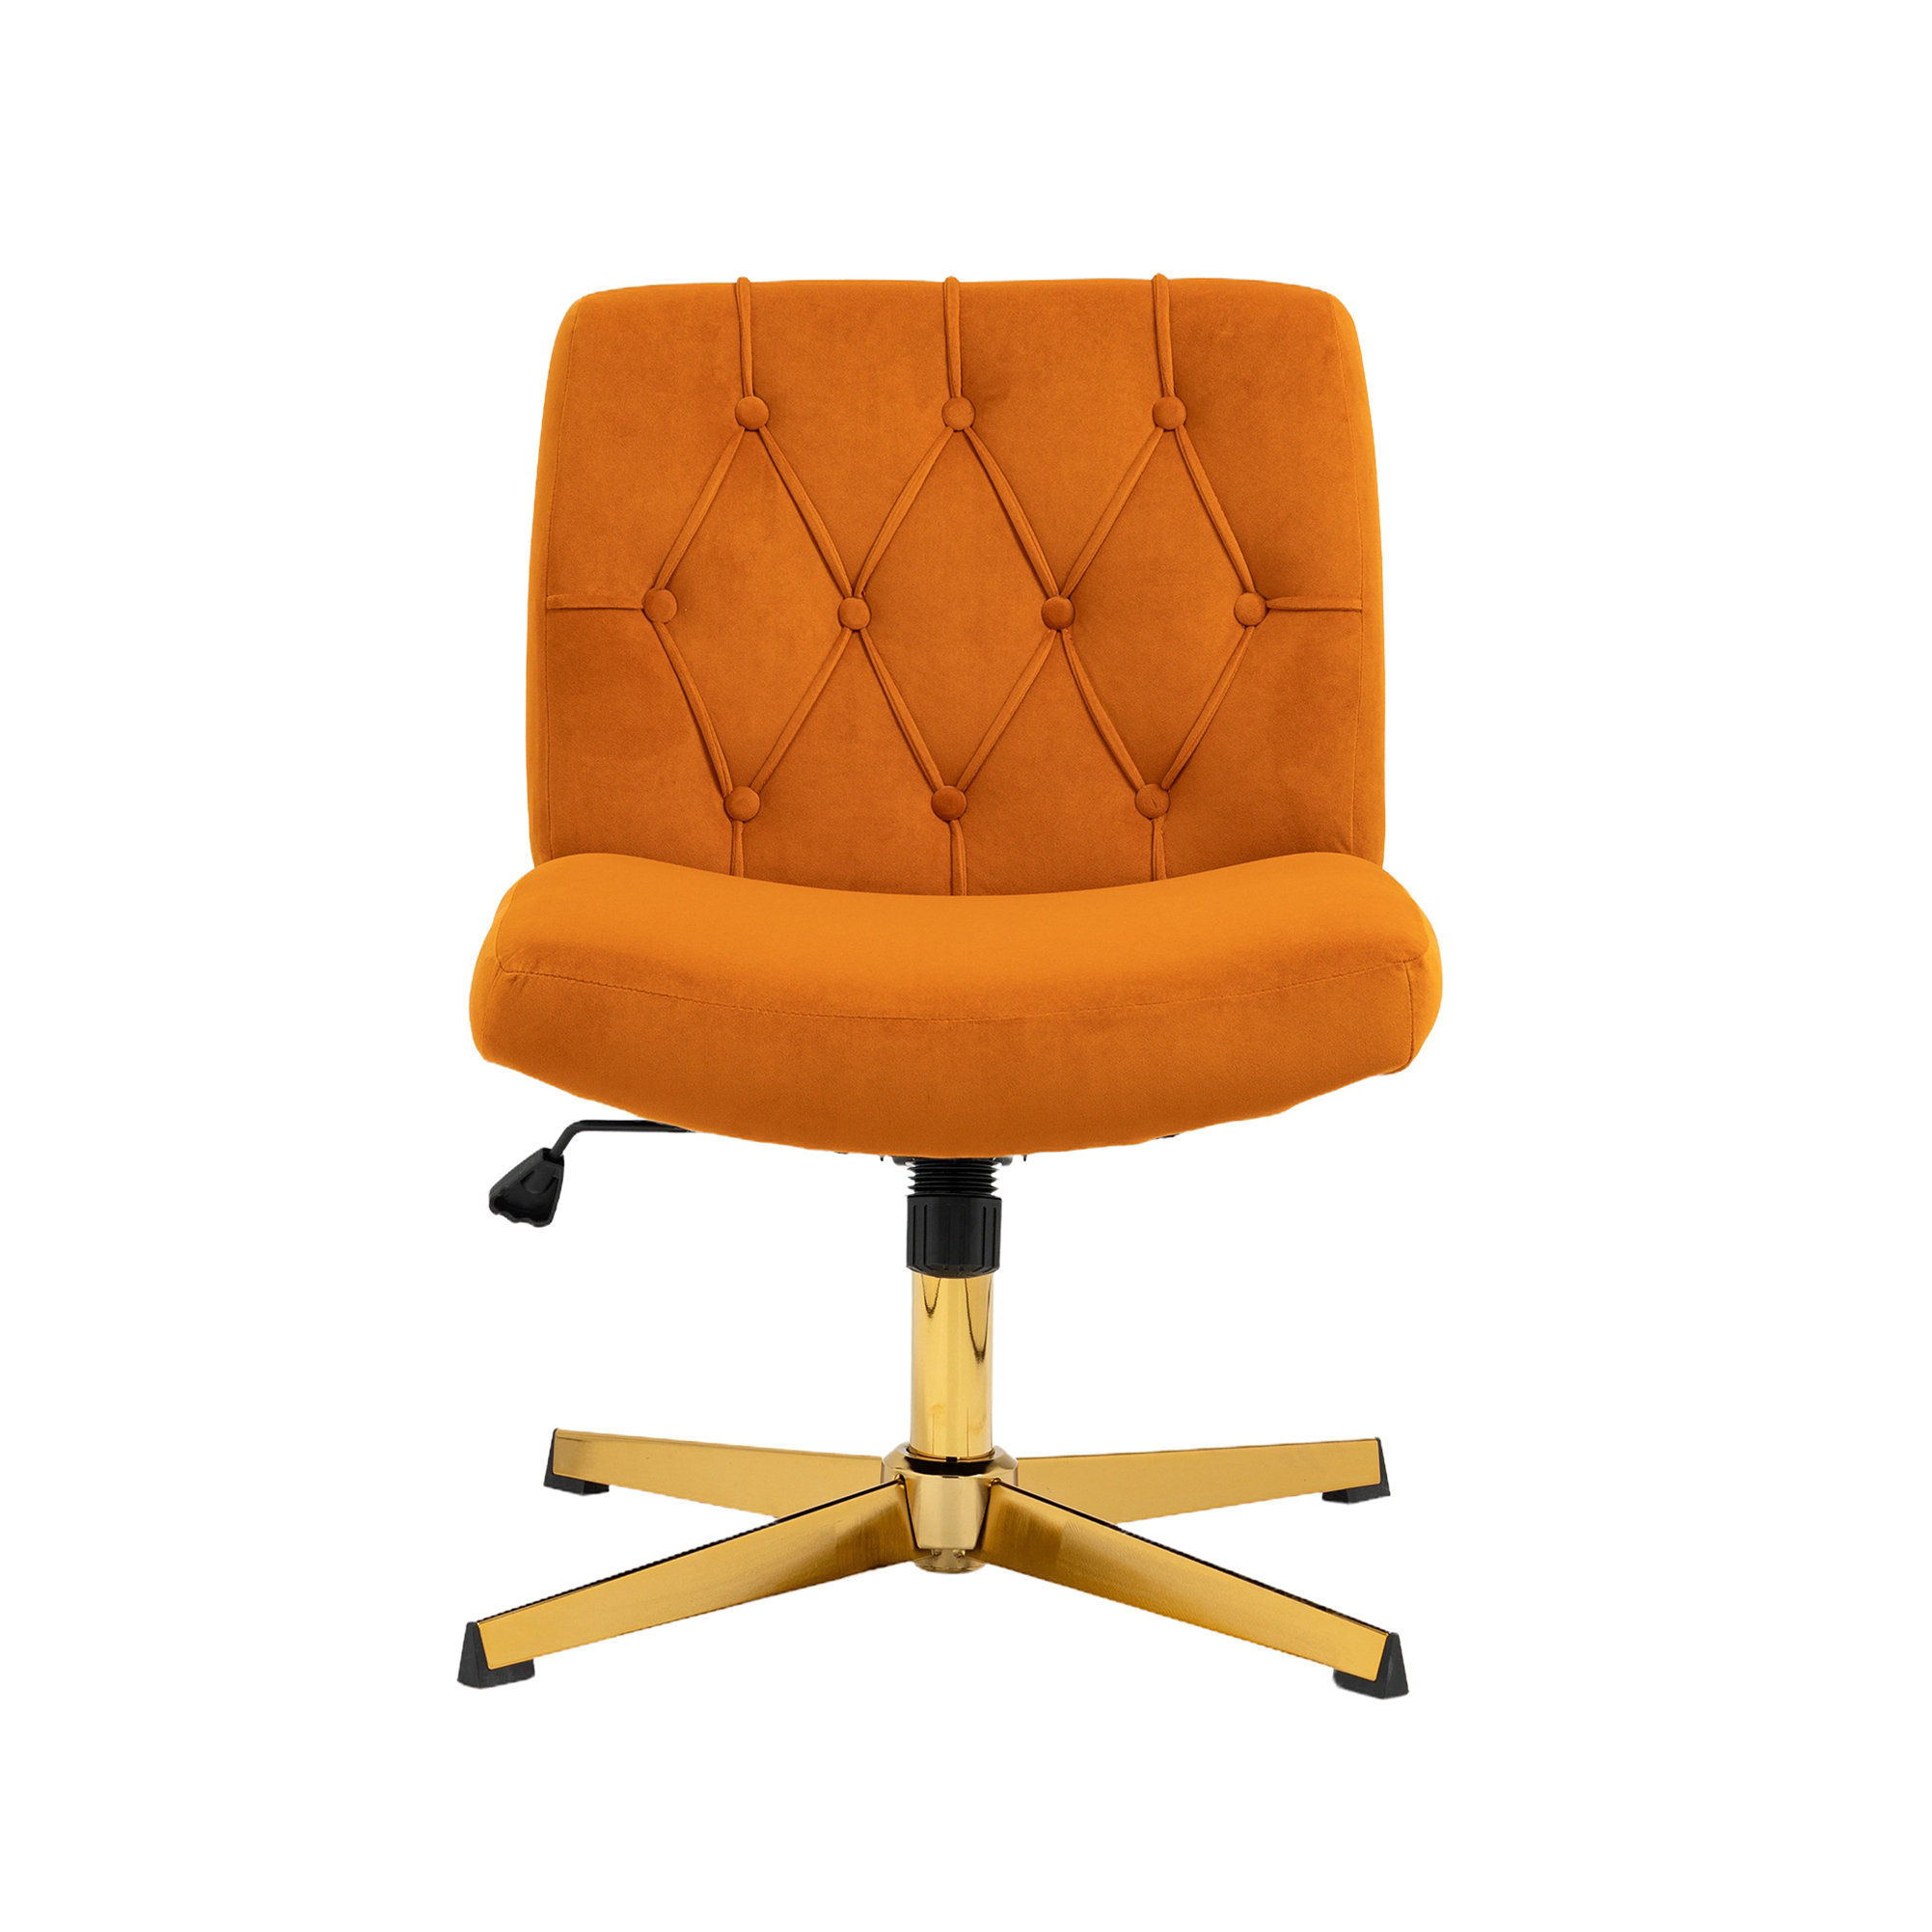 Beaussicot Polyester Task Chair Wade Logan Fabric: Yellow Polyester